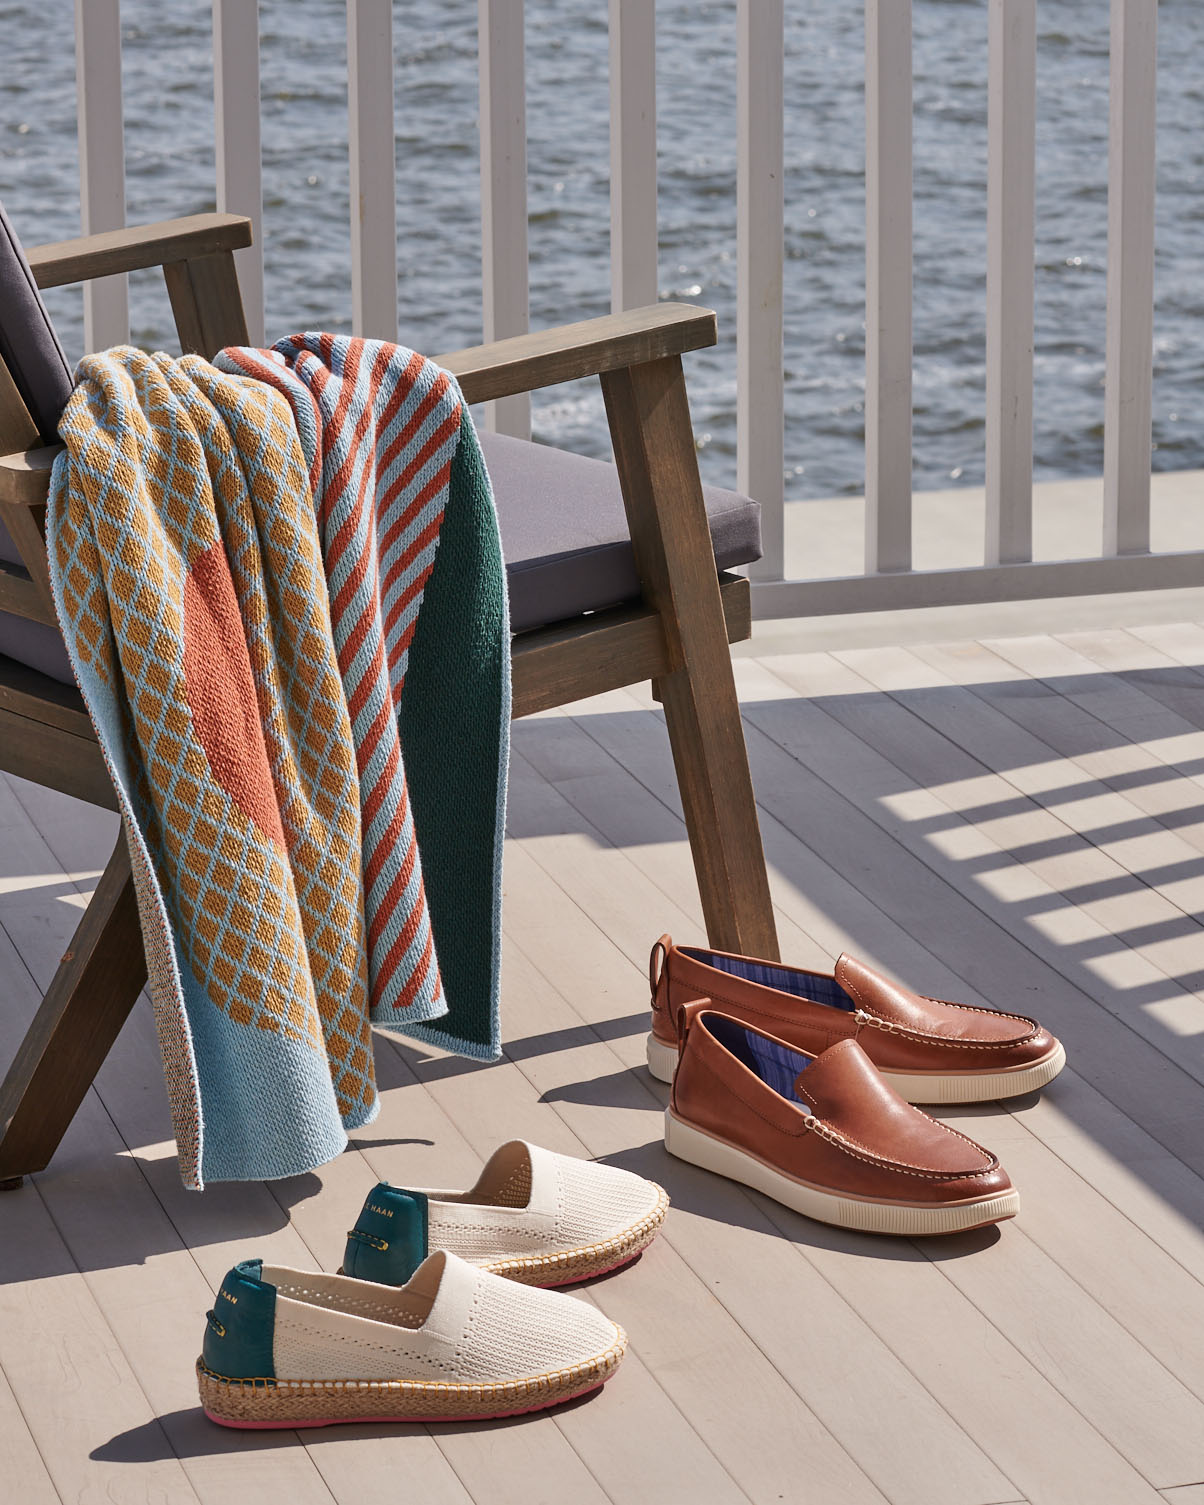 Boat shoes on lake deck by  Alison Gootee Photography